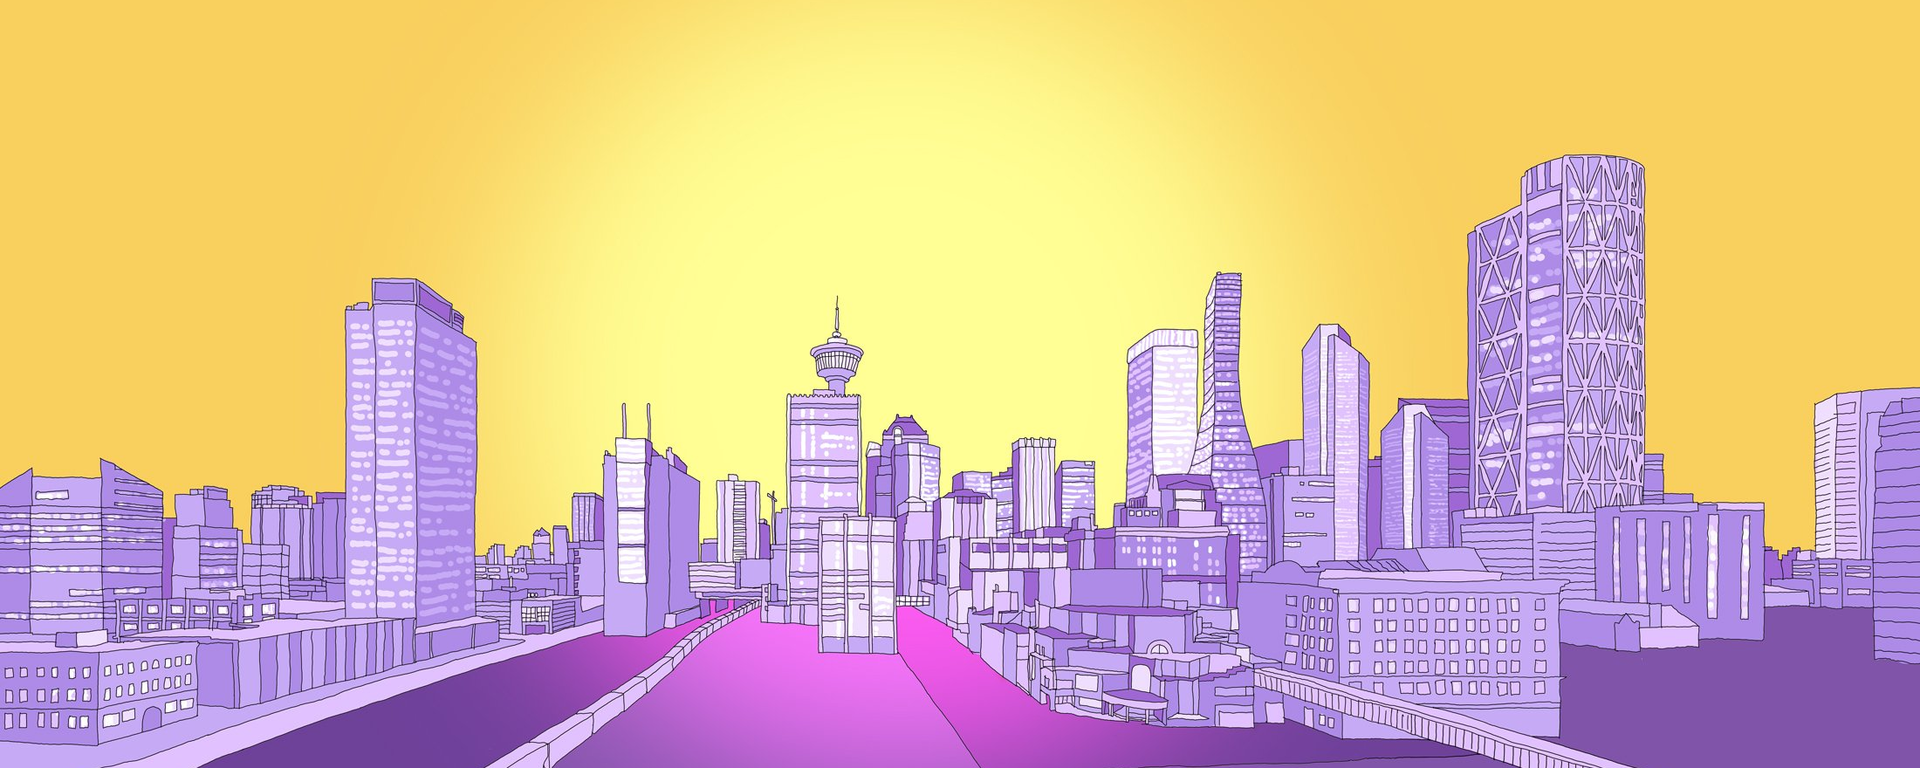 Innovation Week YYC background graphic